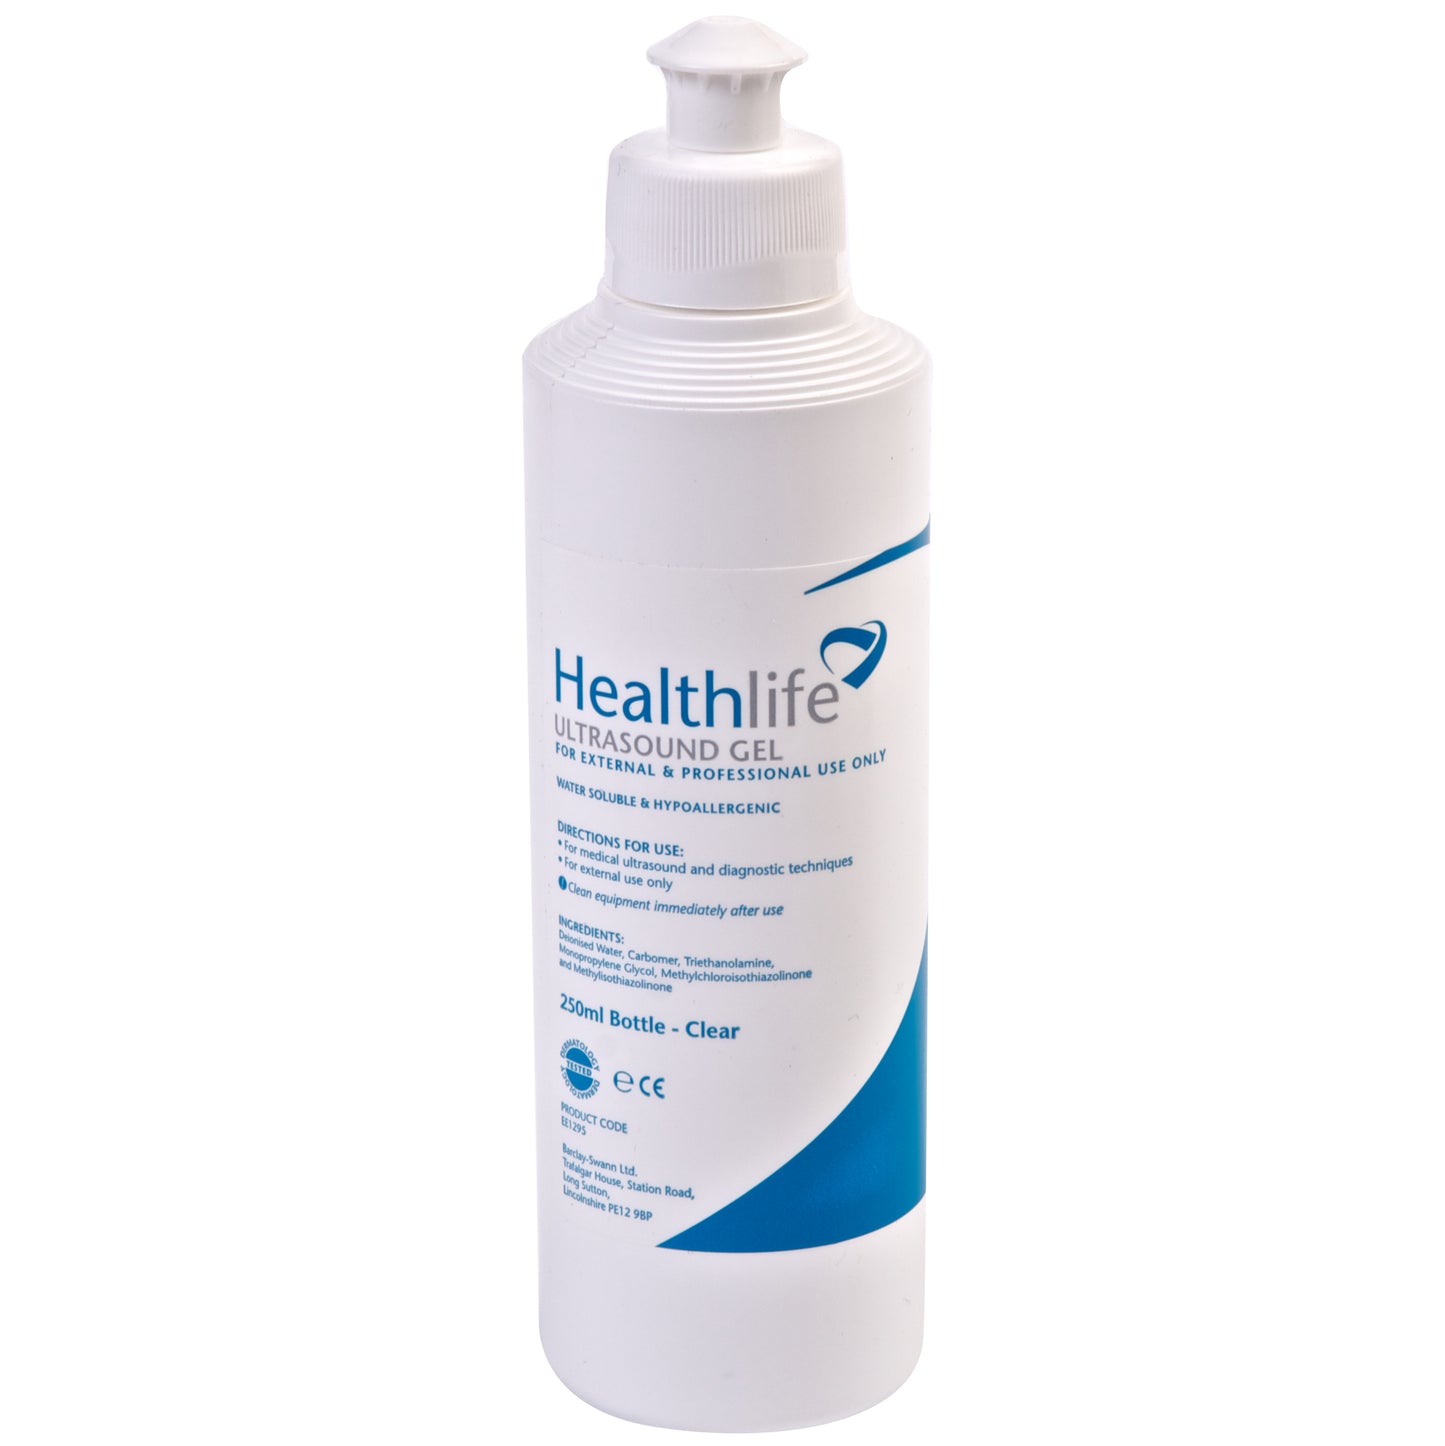 Healthlife Ultrasound Clear Gel 5 Litre Cubitainer With FREE Refill Bottle - Case of 4